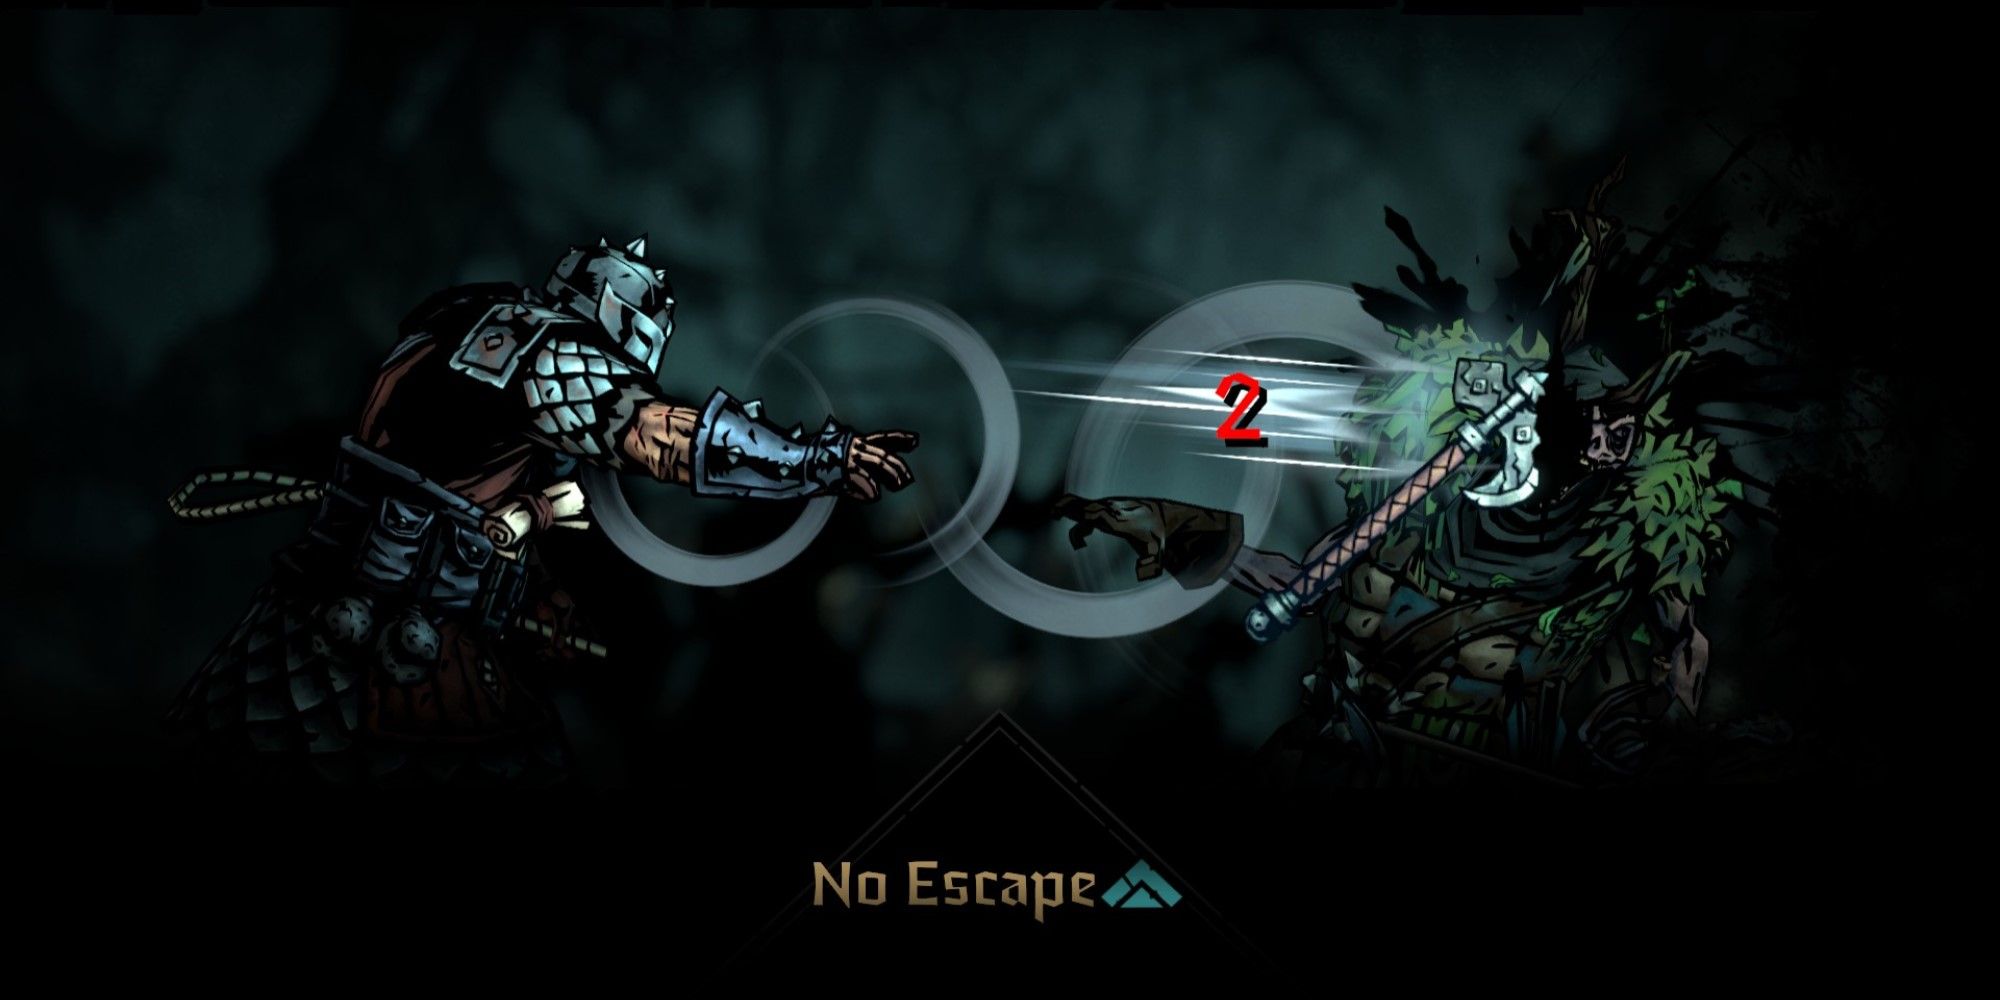 A screenshot of the No Escape Skill being used in Darkest Dungeon 2